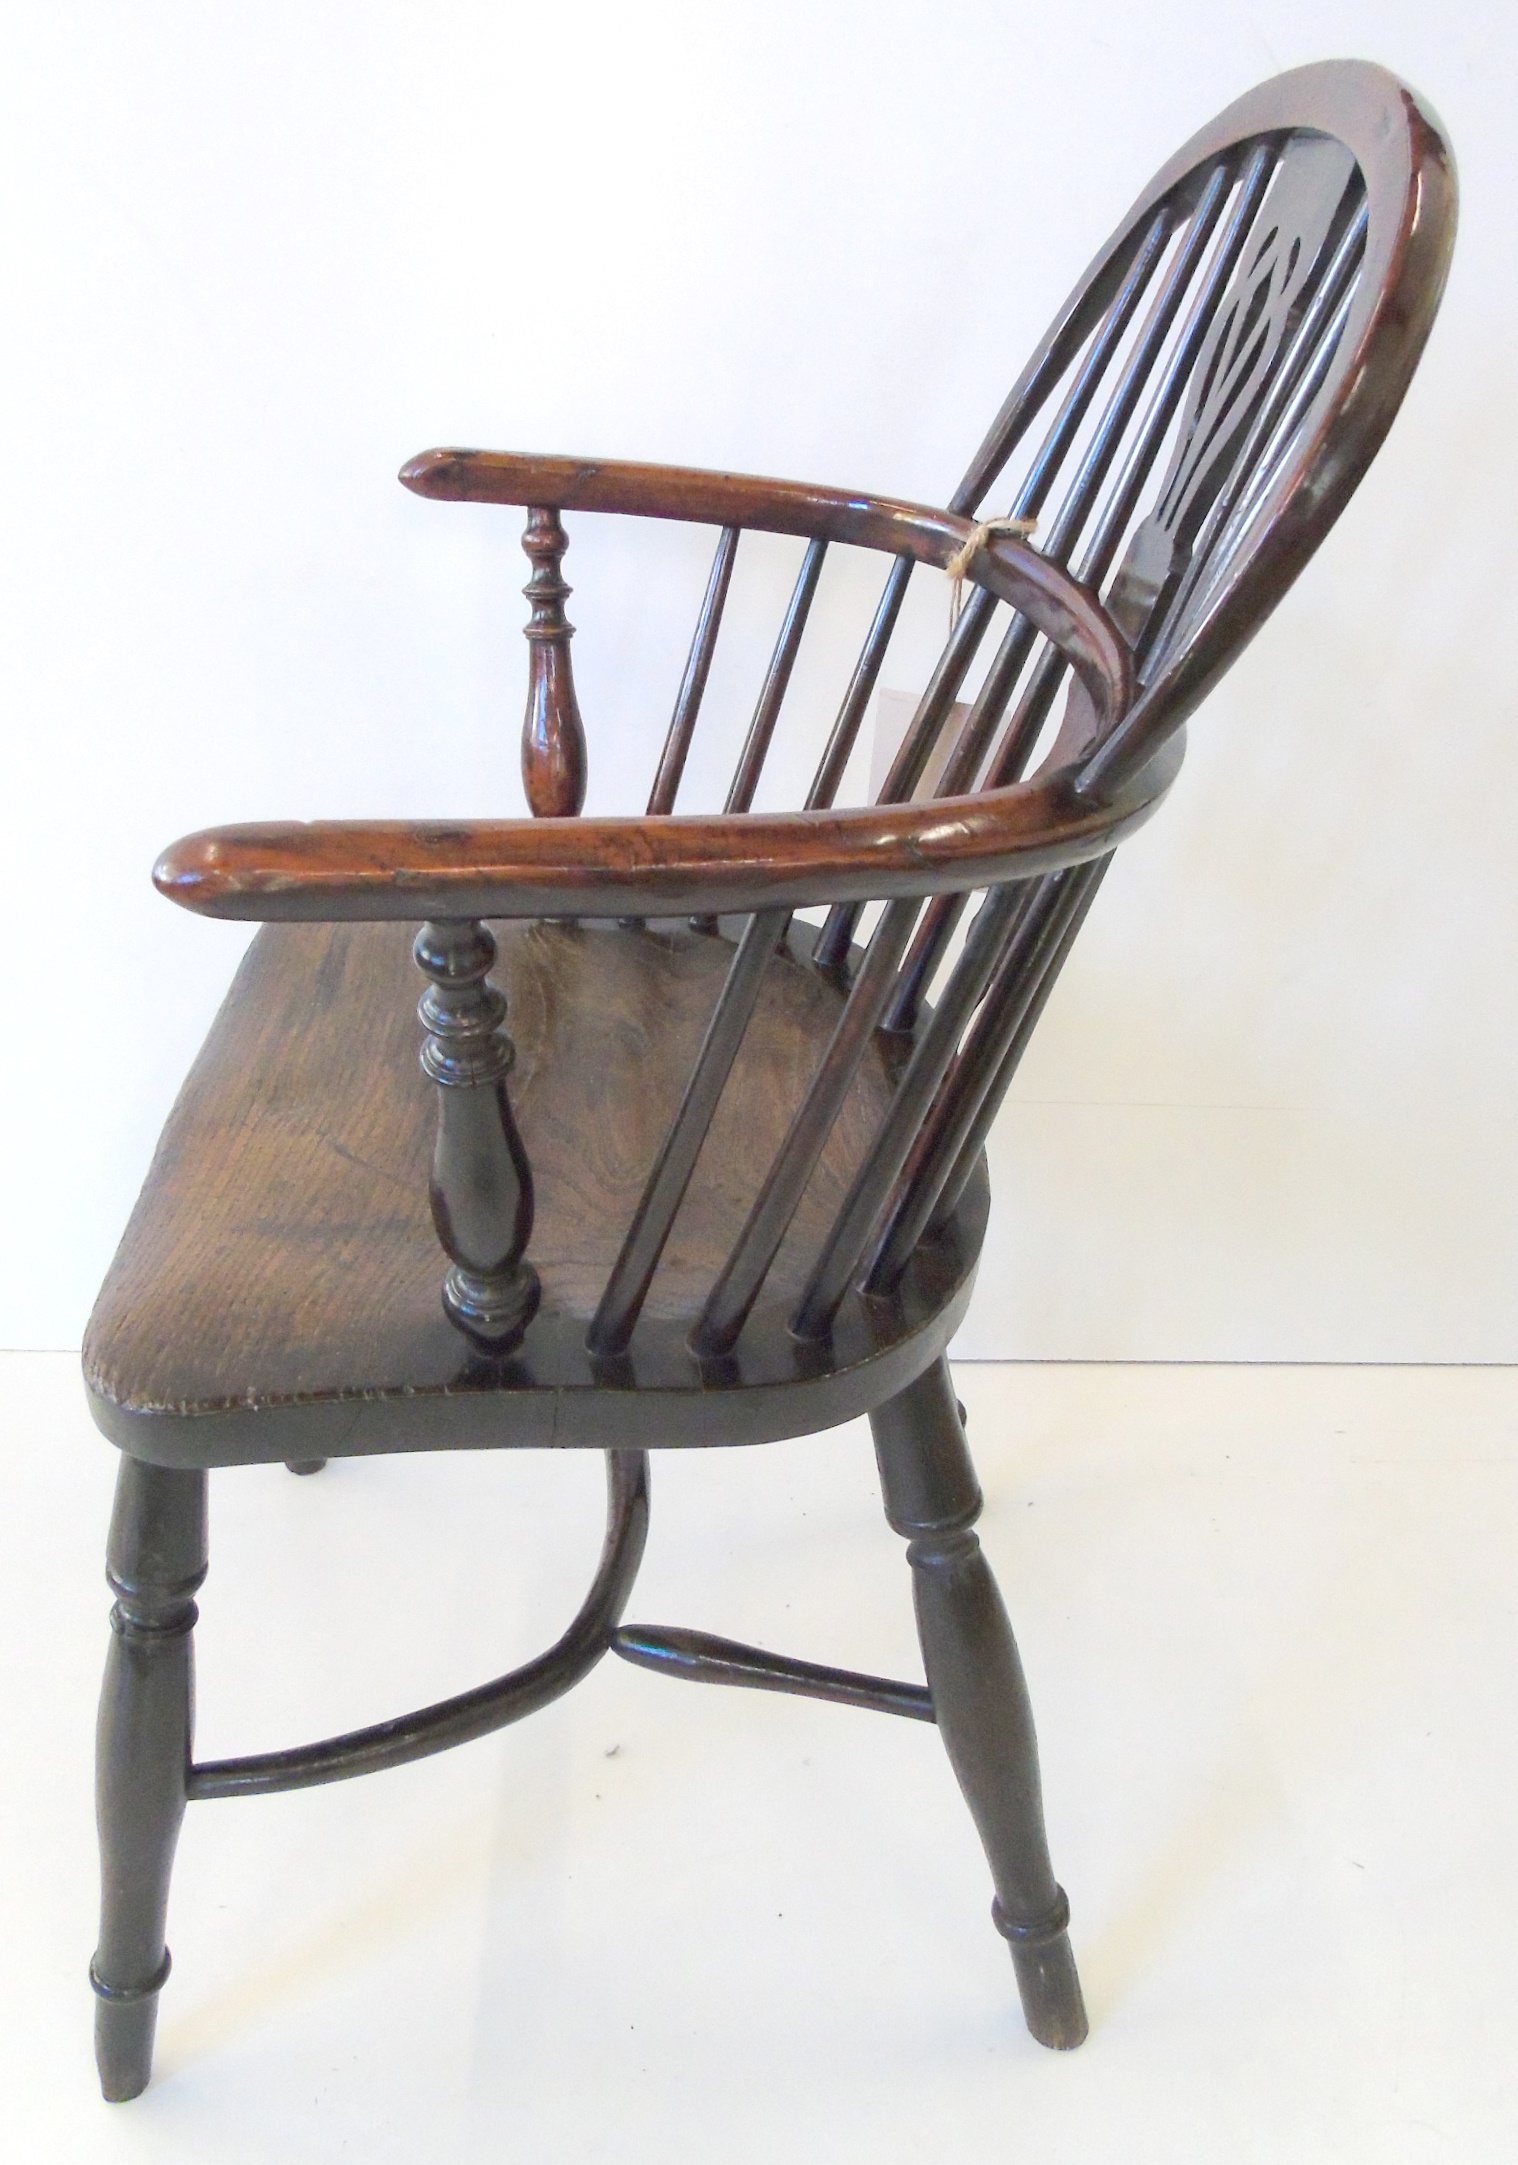 Early 19th century yew and elm low-back Windsor chair - Image 7 of 9